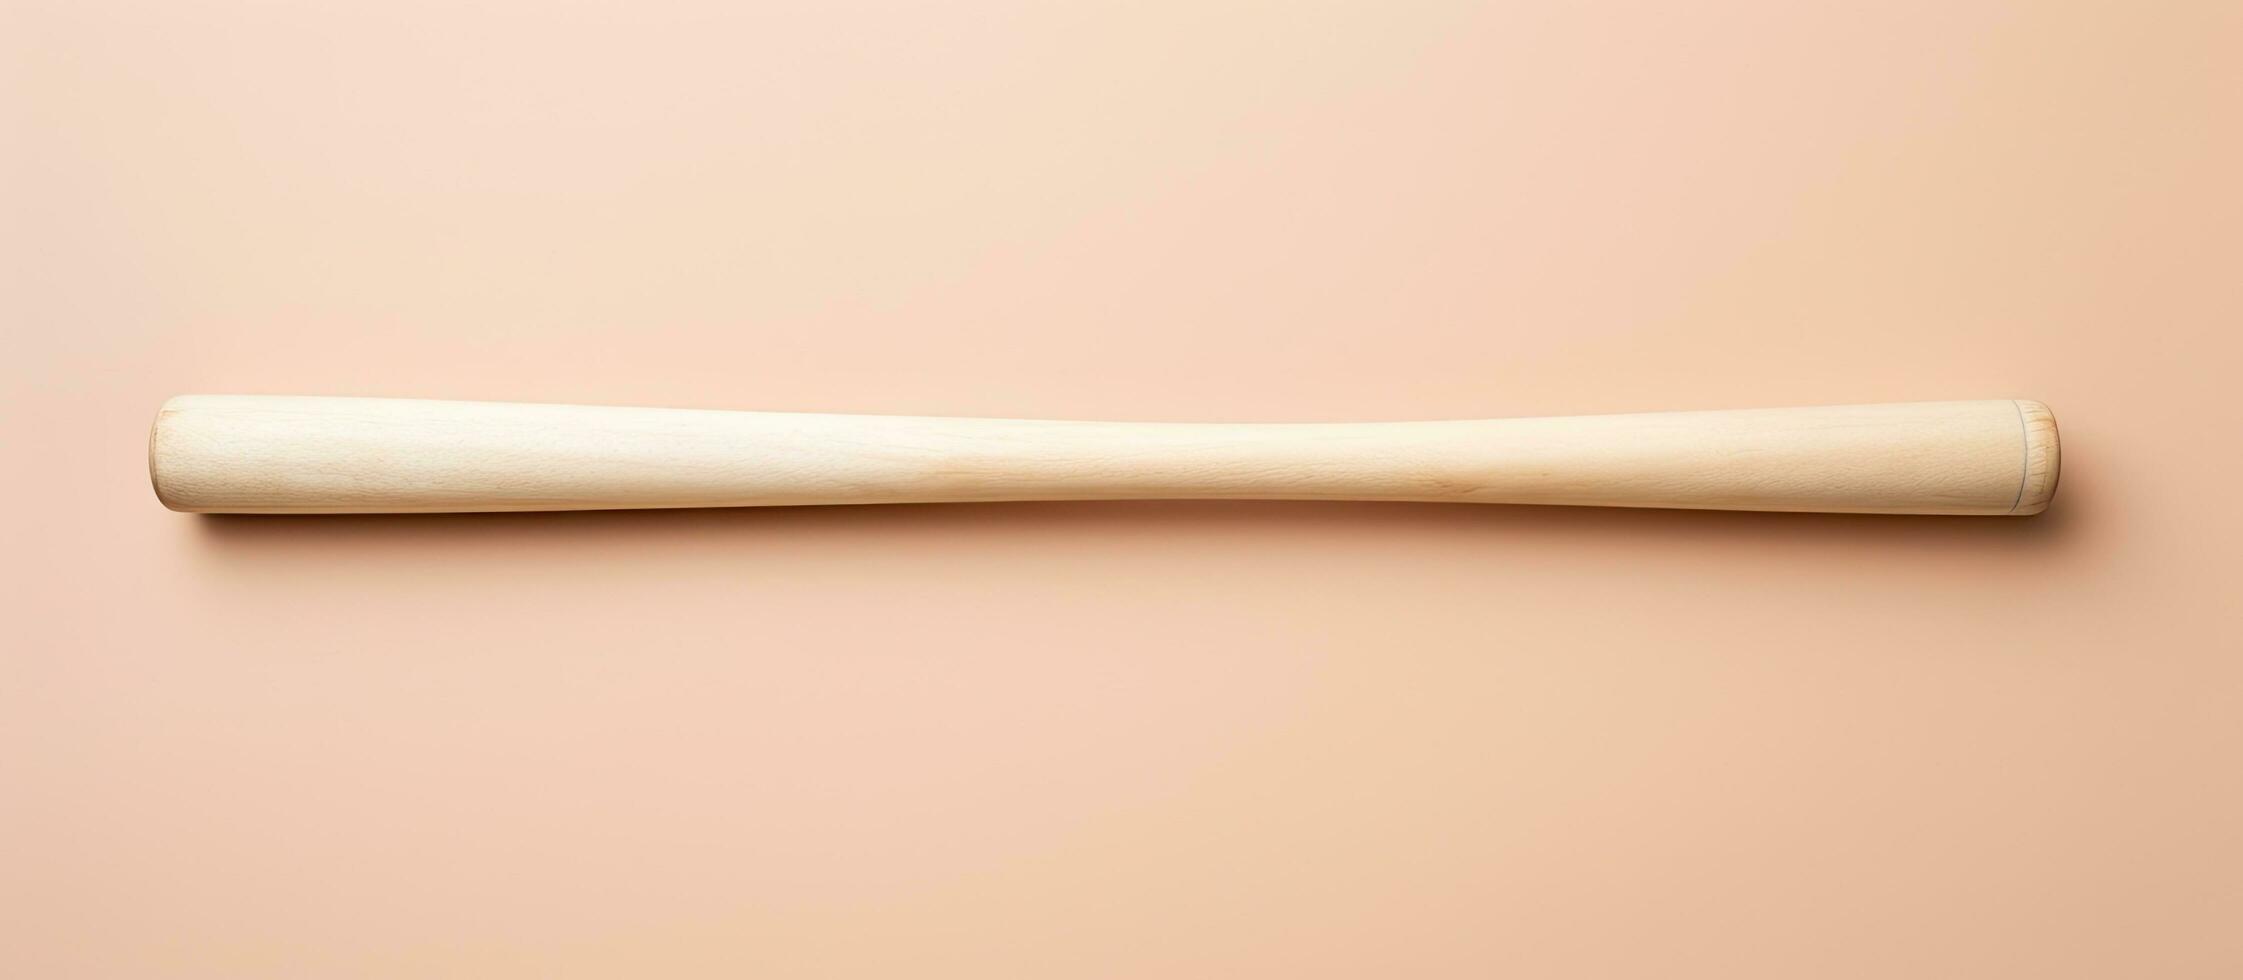 Photo of a wooden baseball bat against a vibrant pink wall with empty space for text or design with copy space